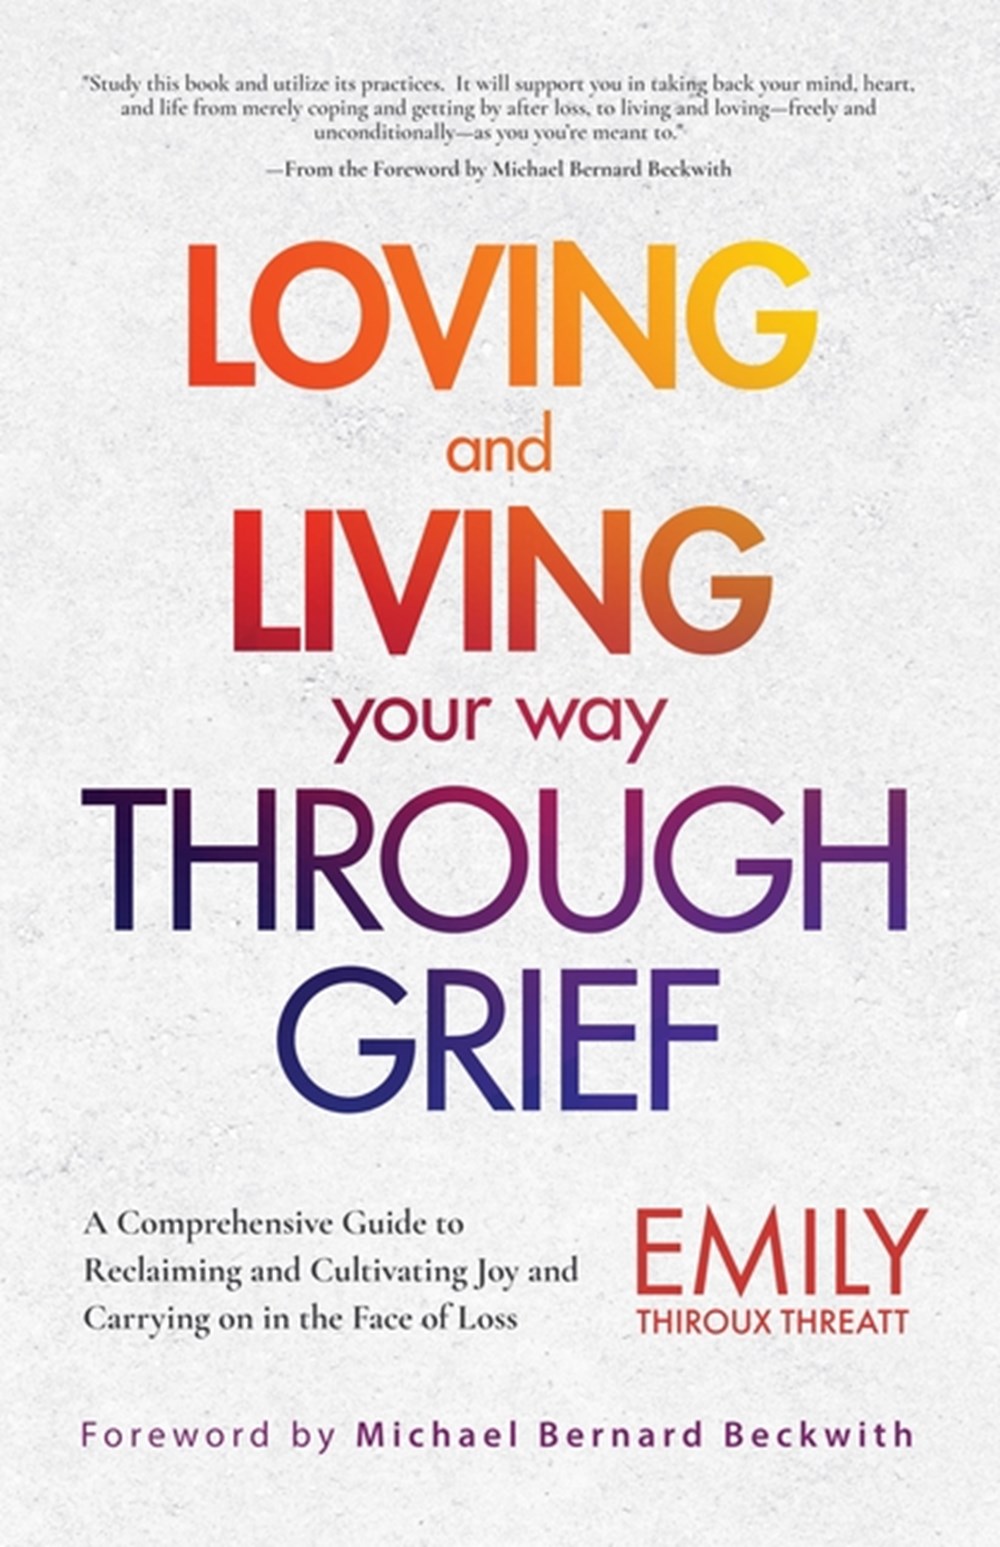 Loving and Living Your Way Through Grief: A Comprehensive Guide to Reclaiming and Cultivating Joy an